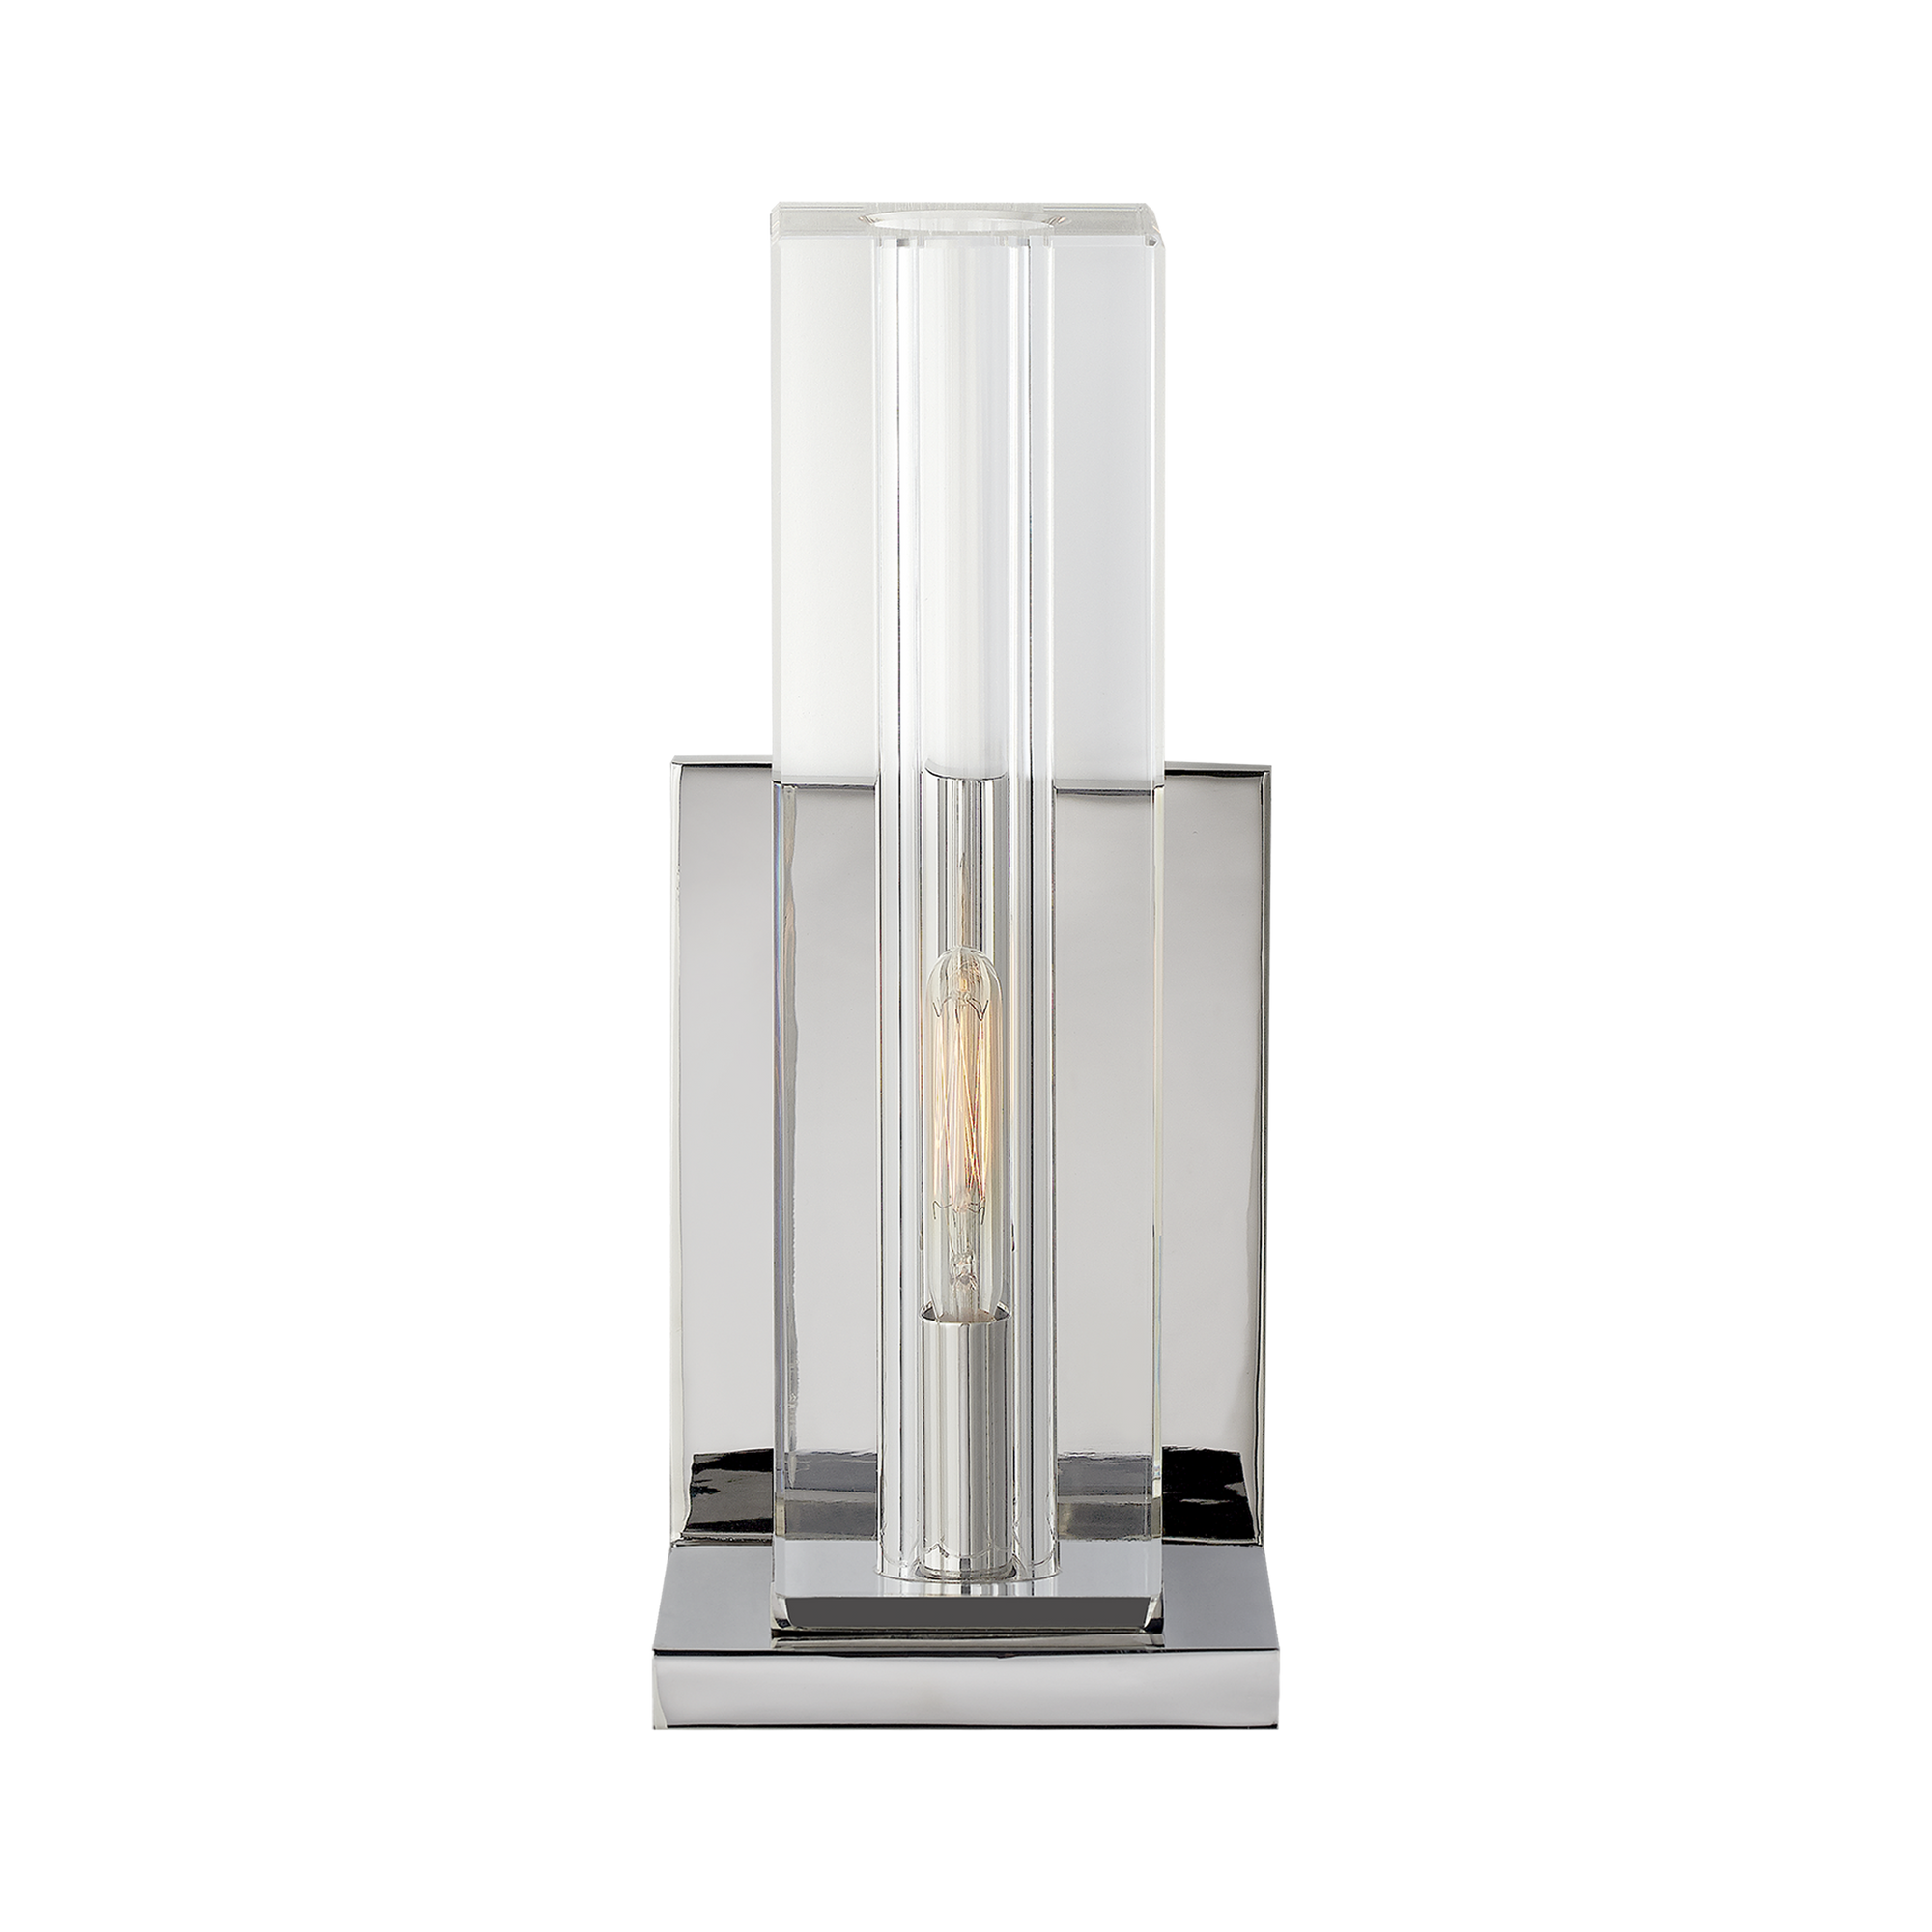 The Ambar Tall Wall Light bridges elegance and function, with a modern edge.